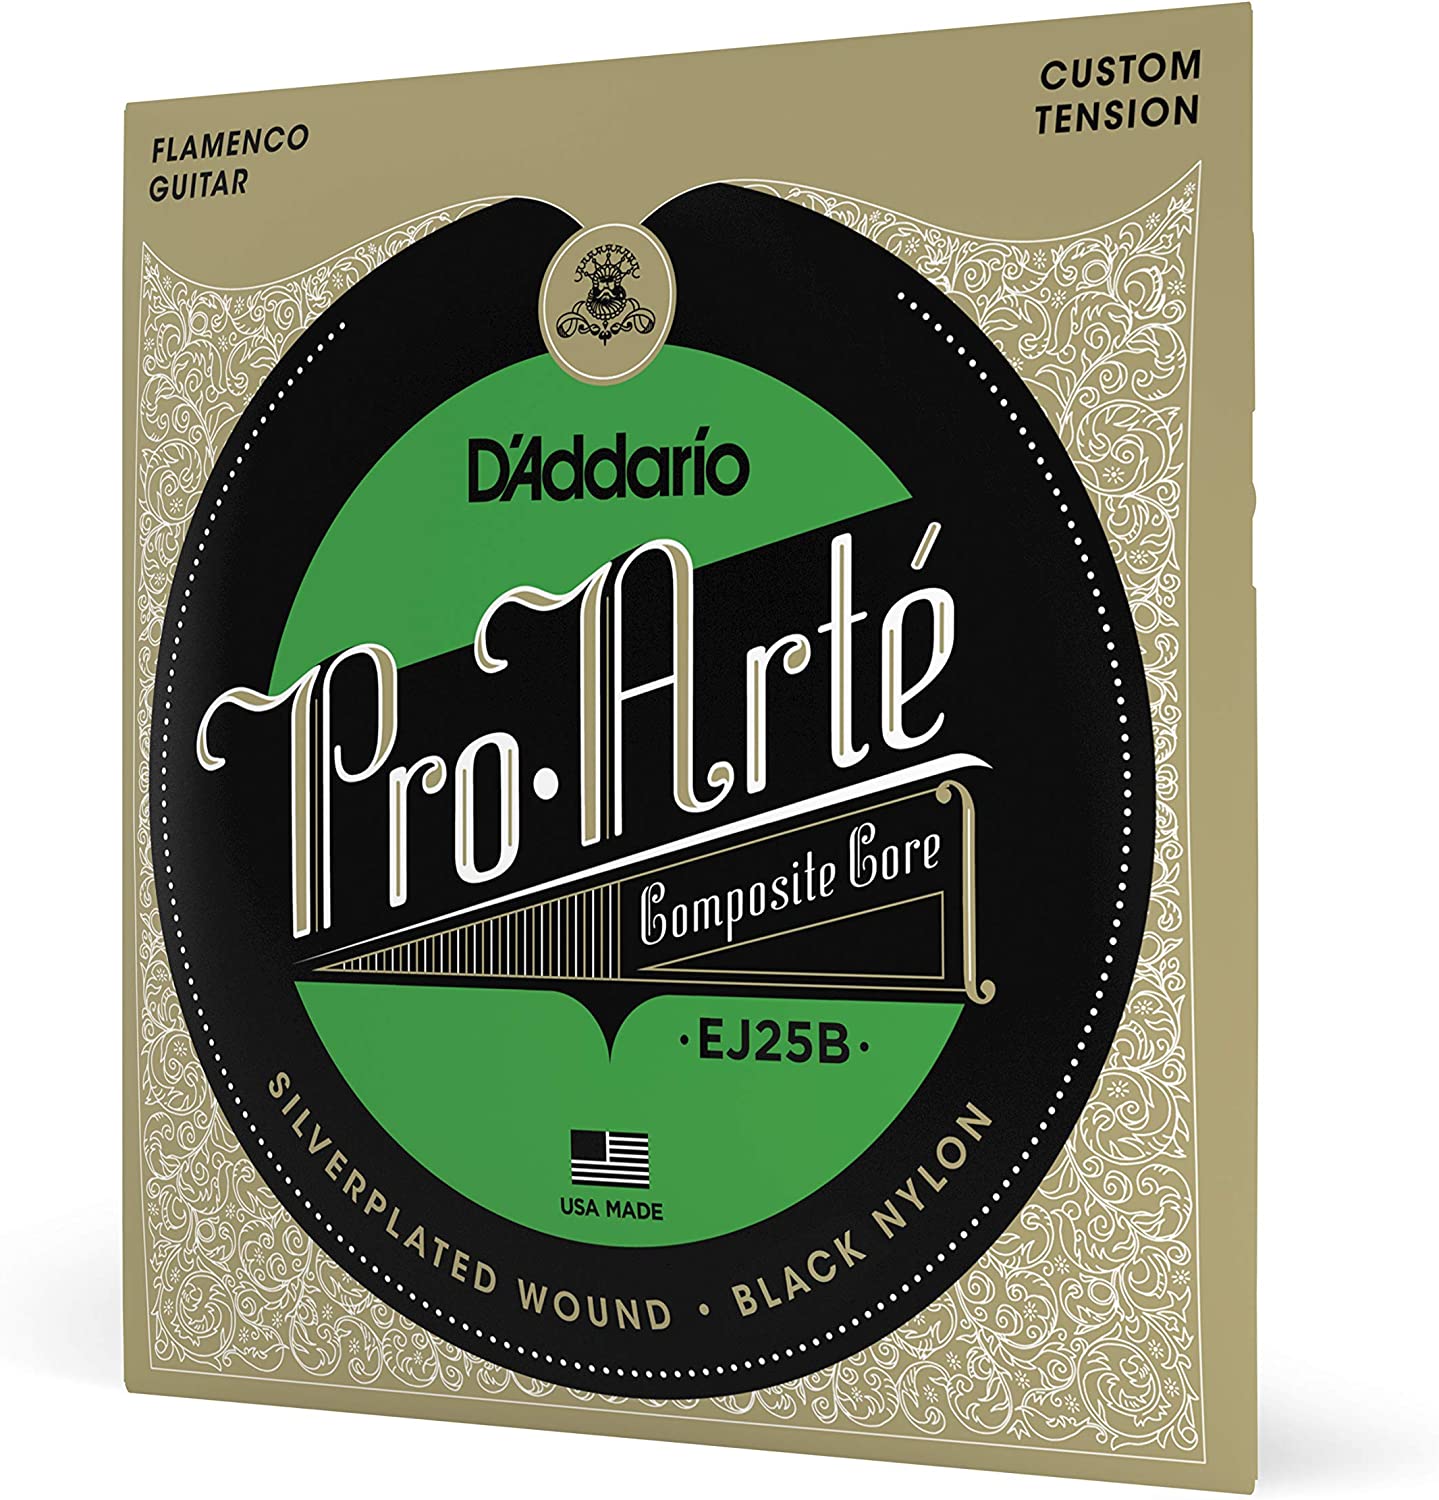 D'Addario EJ25B Classical Guitar Strings on a white background